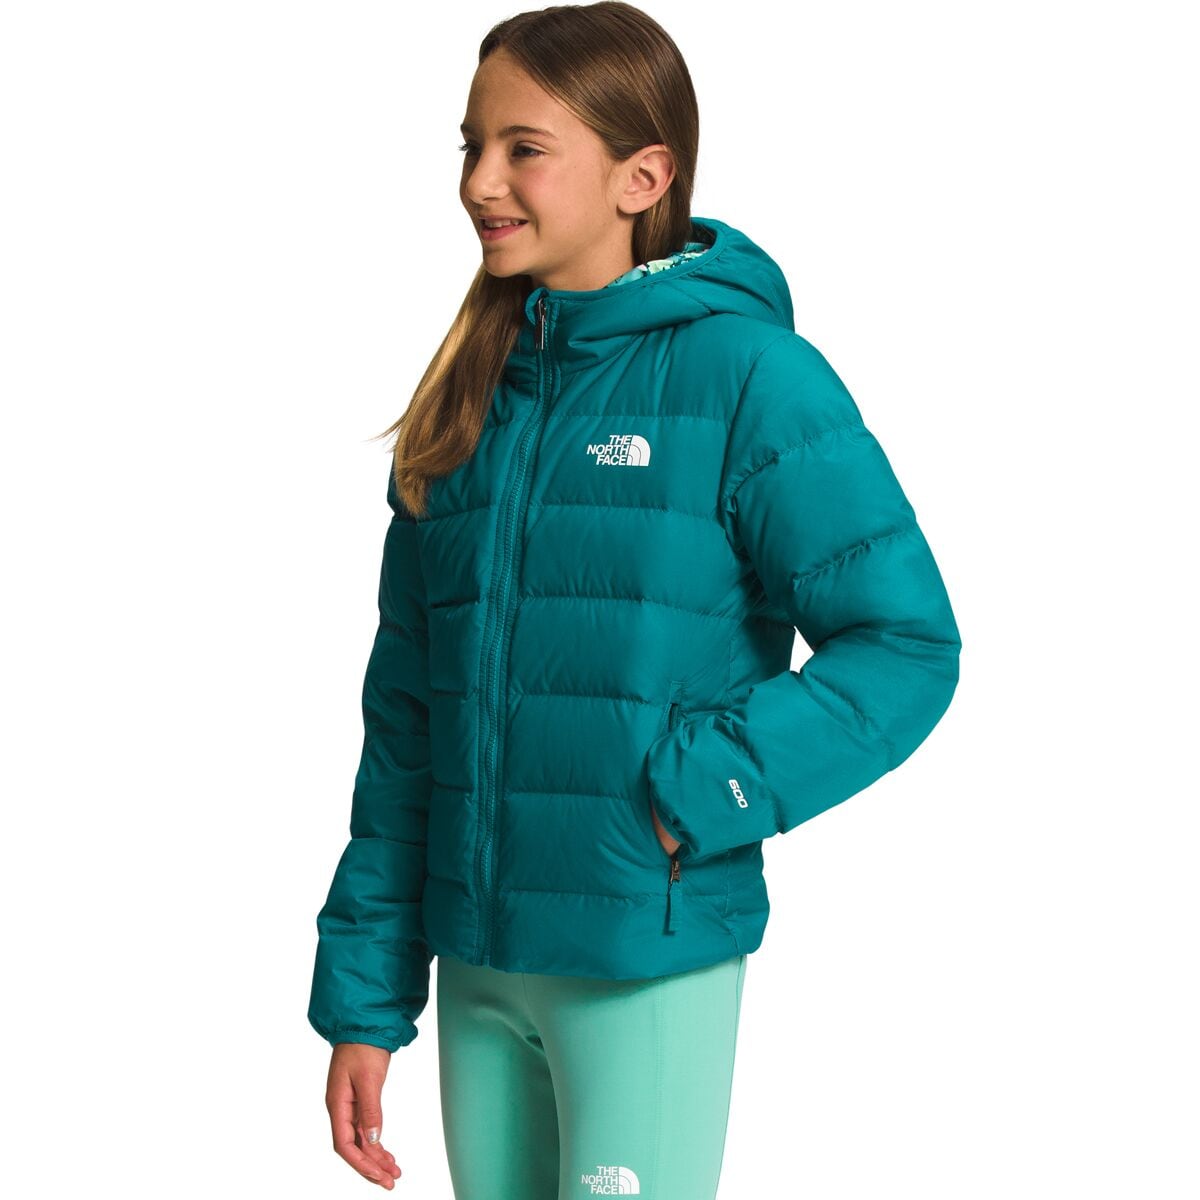 The North Face North Down Reversible Hooded Jacket - Girls' Boysenberry Floret Print, L